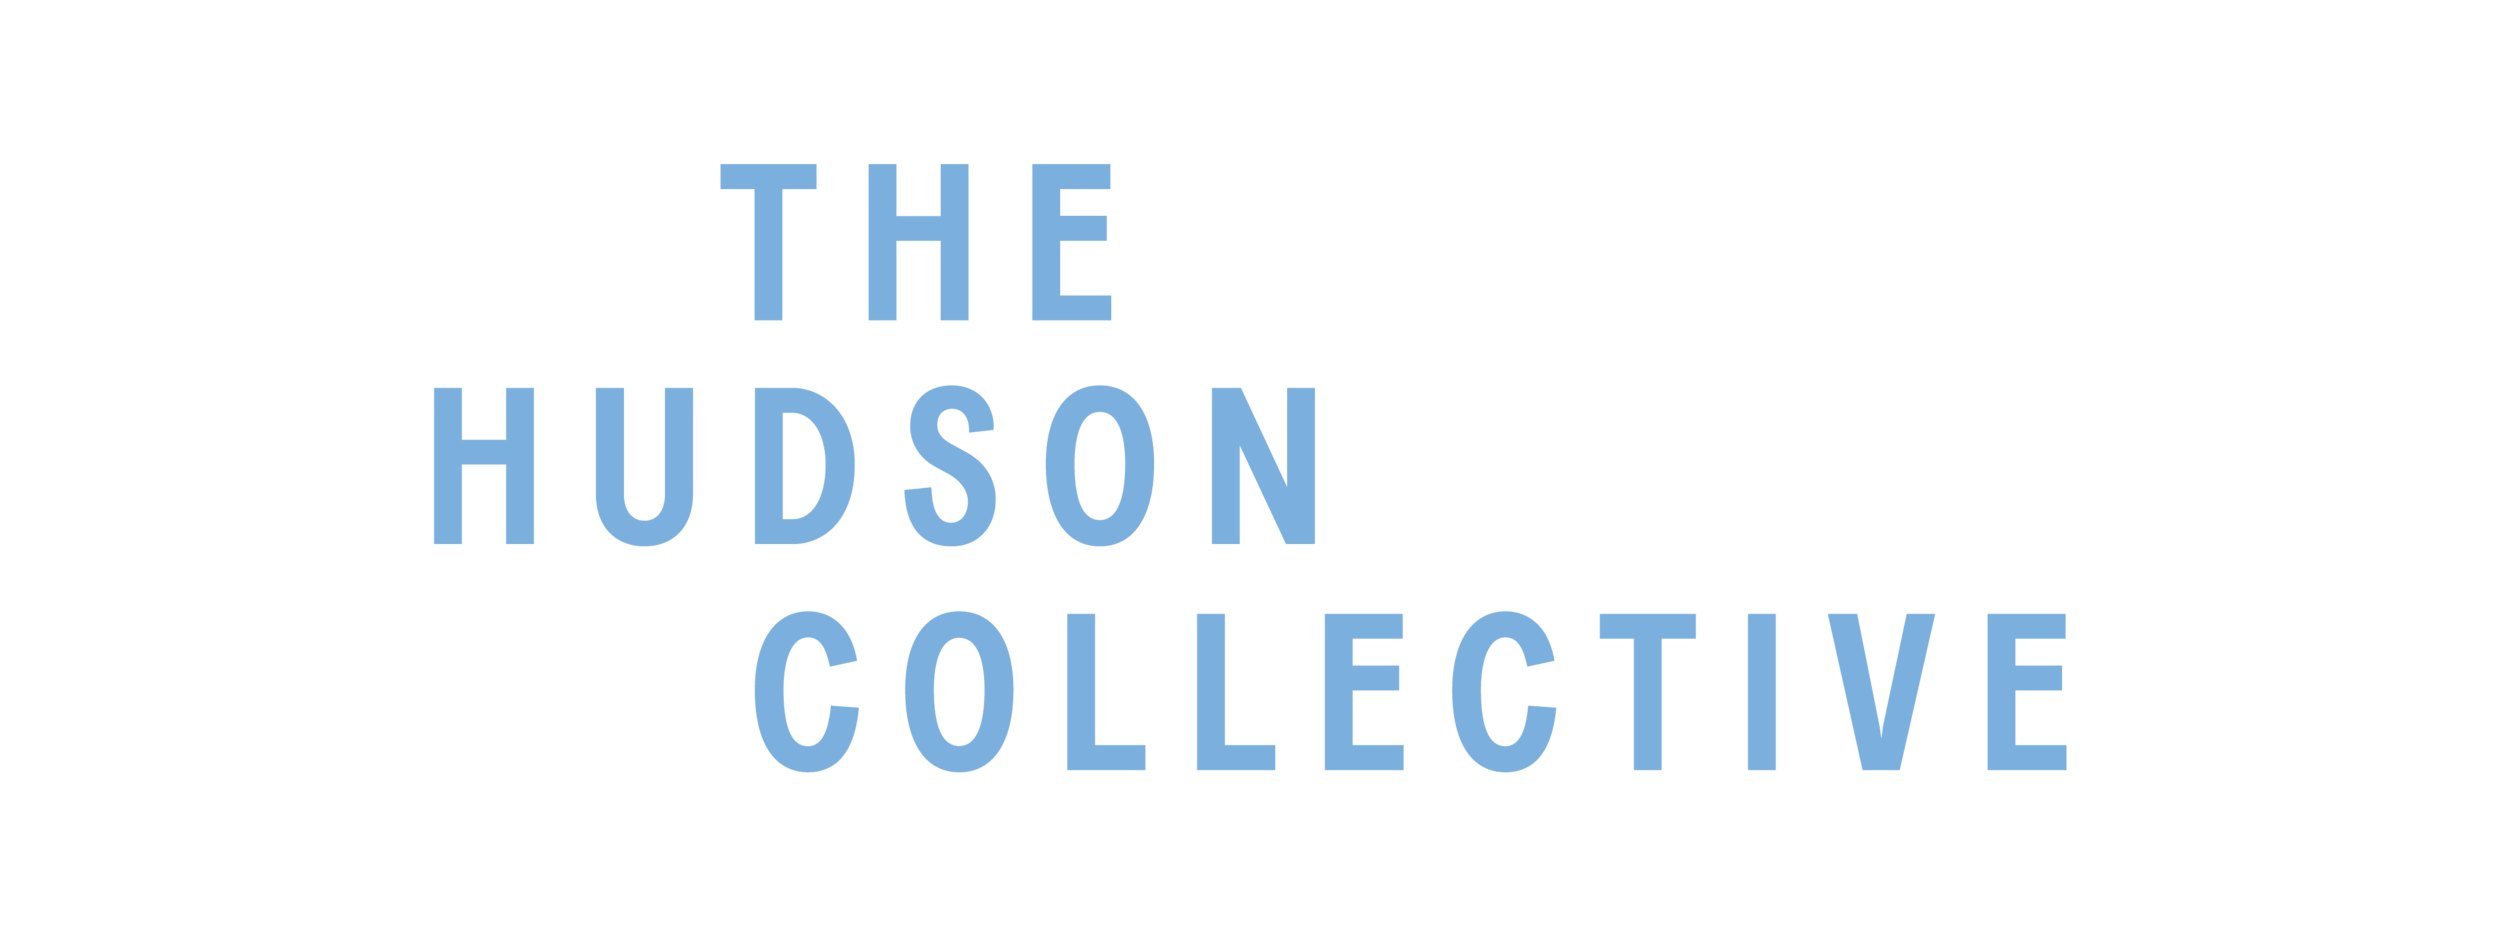 The Hudson Collective